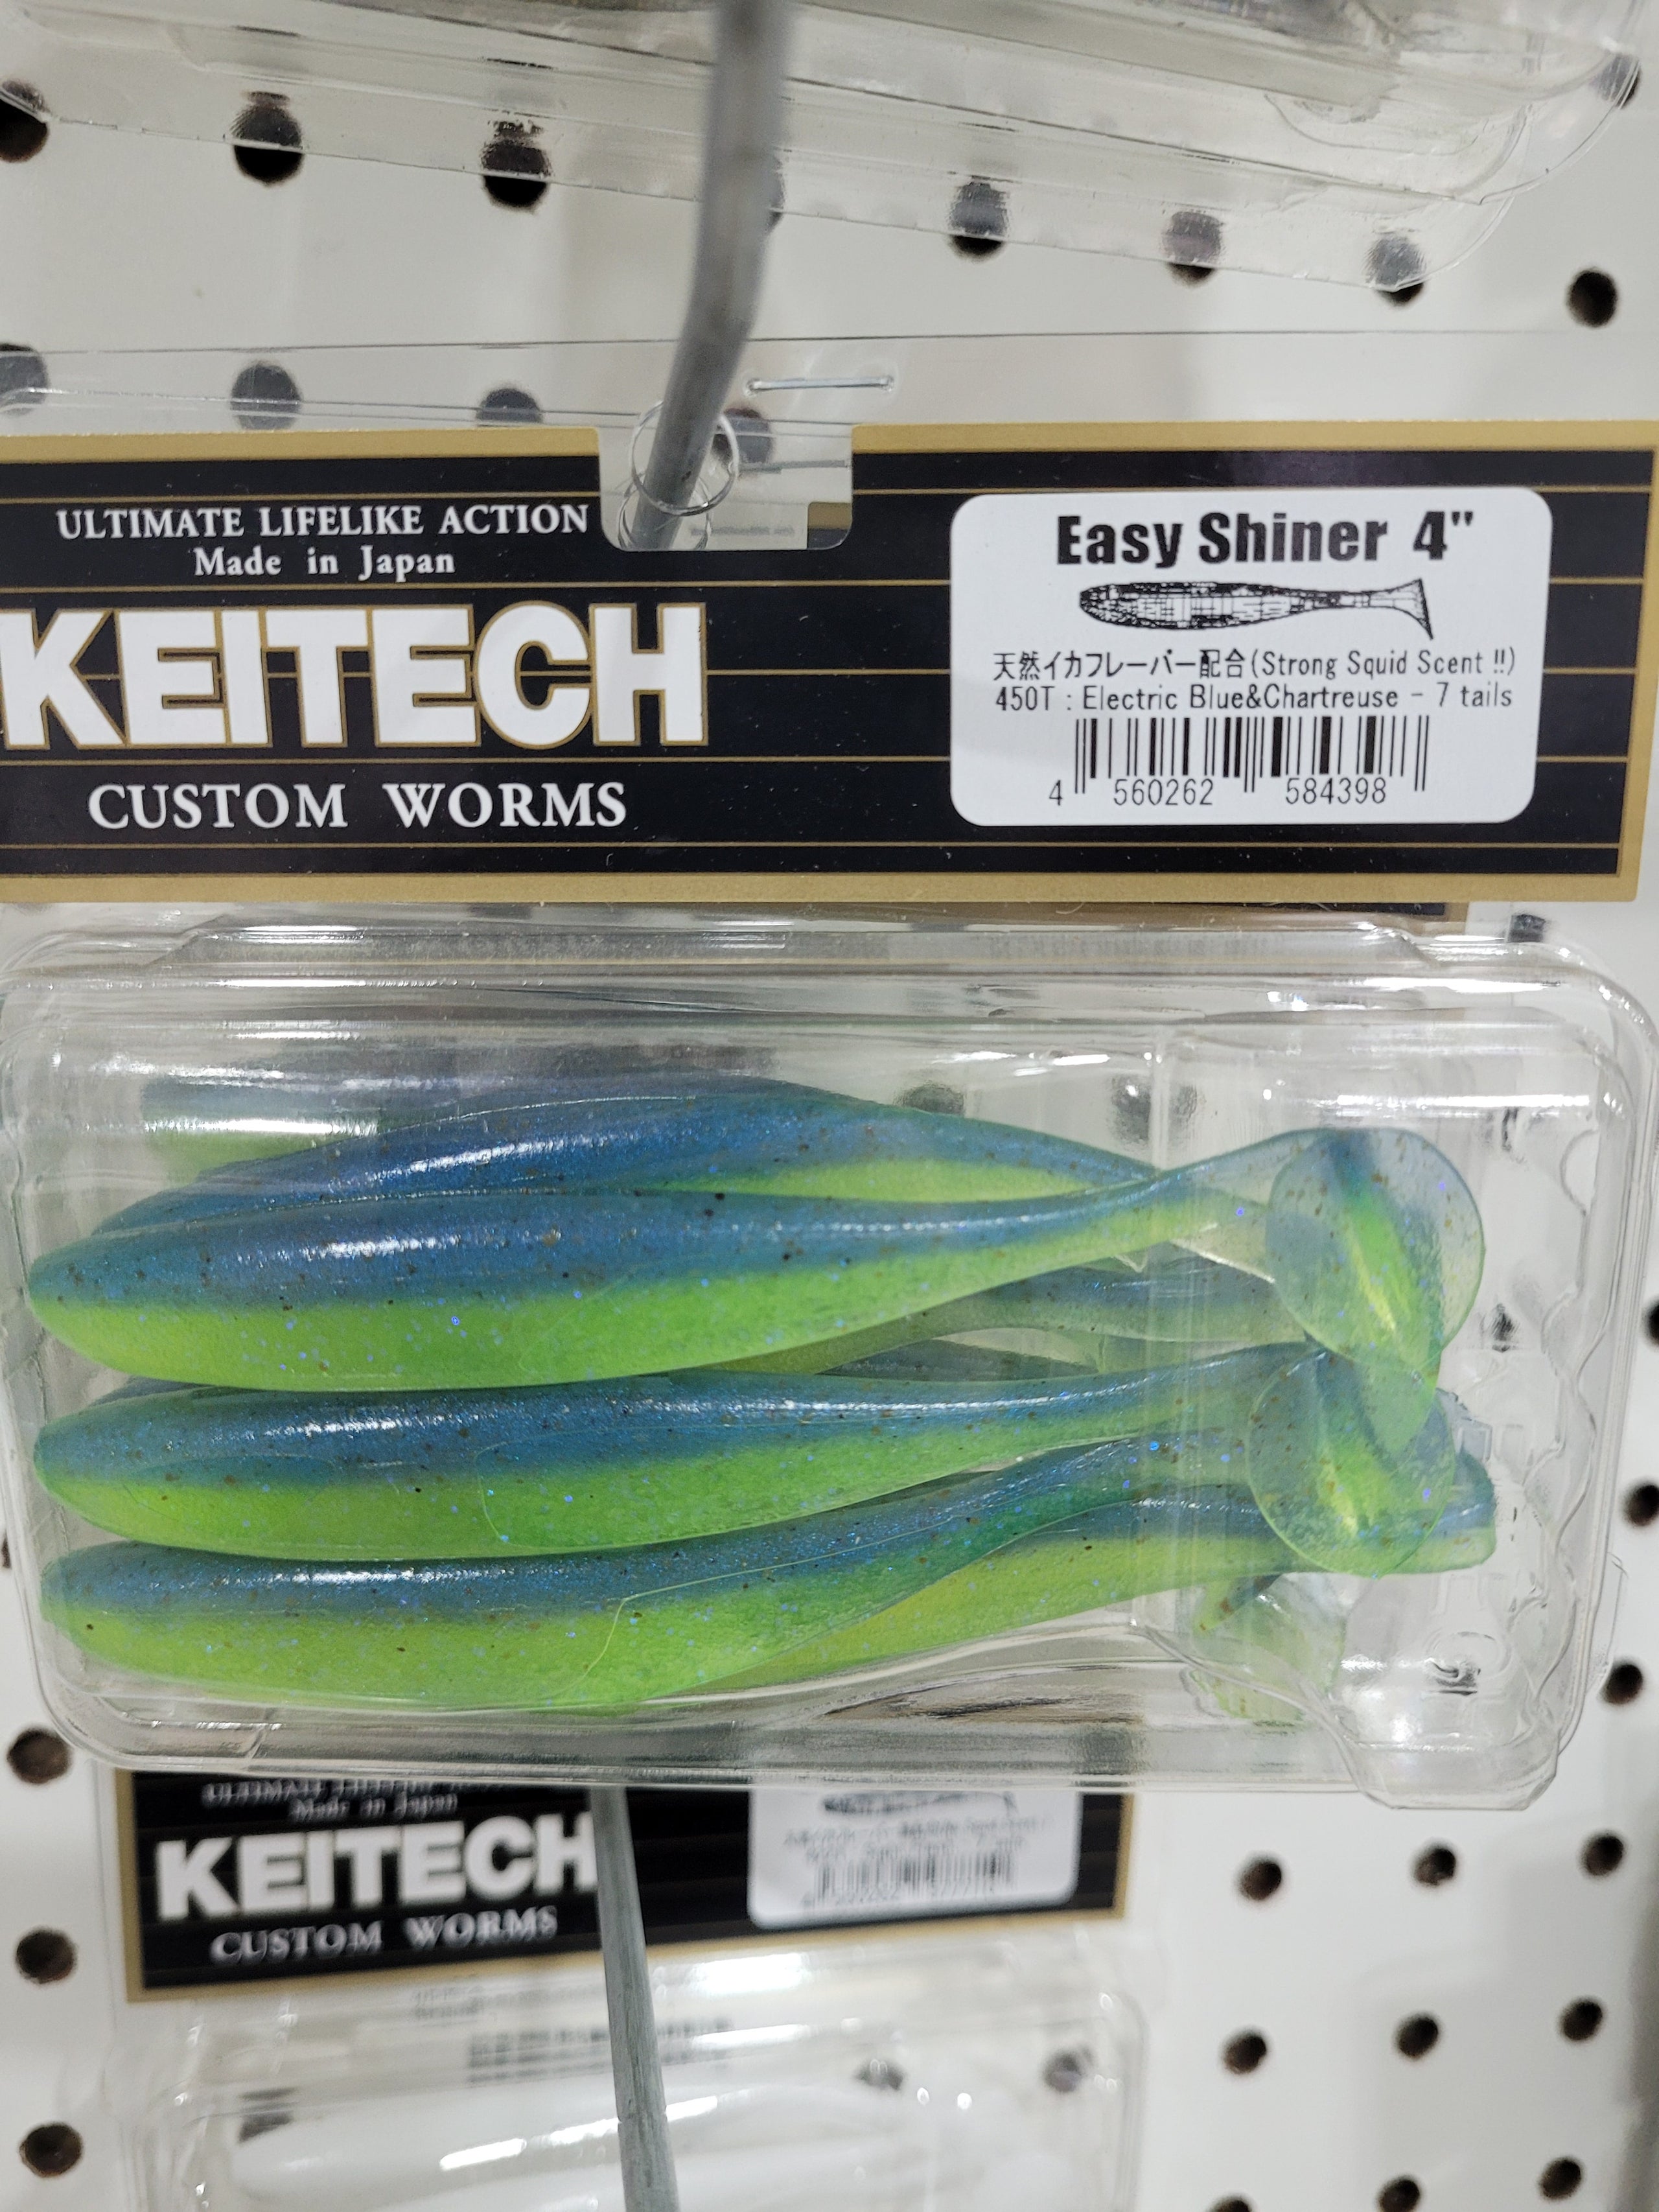 KEITECH EASY SHINER 4 ELECTRIC BLUE CHART.